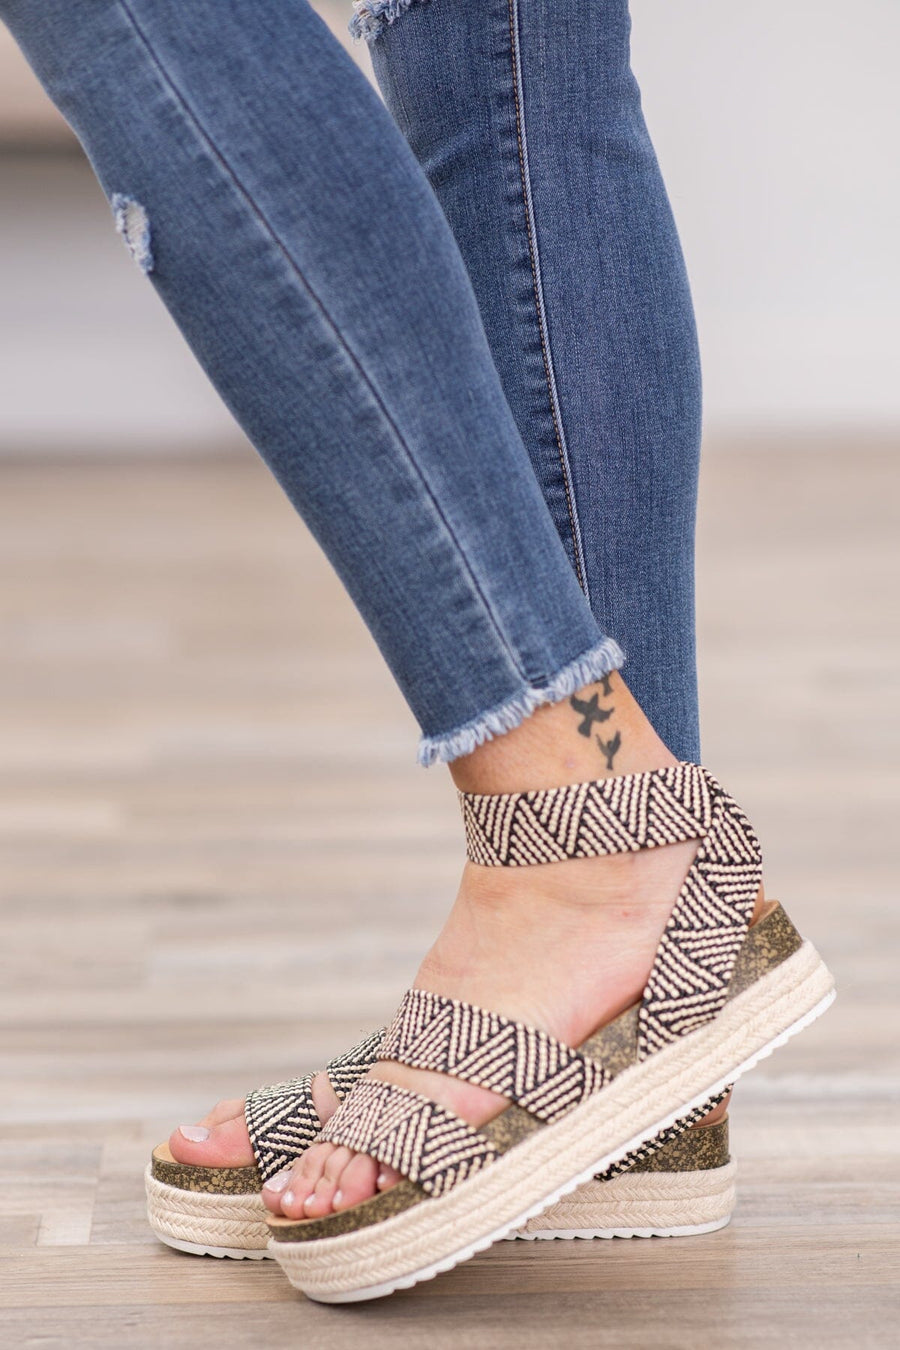 Black and Beige Aztec Print Strap Sandals - Filly Flair